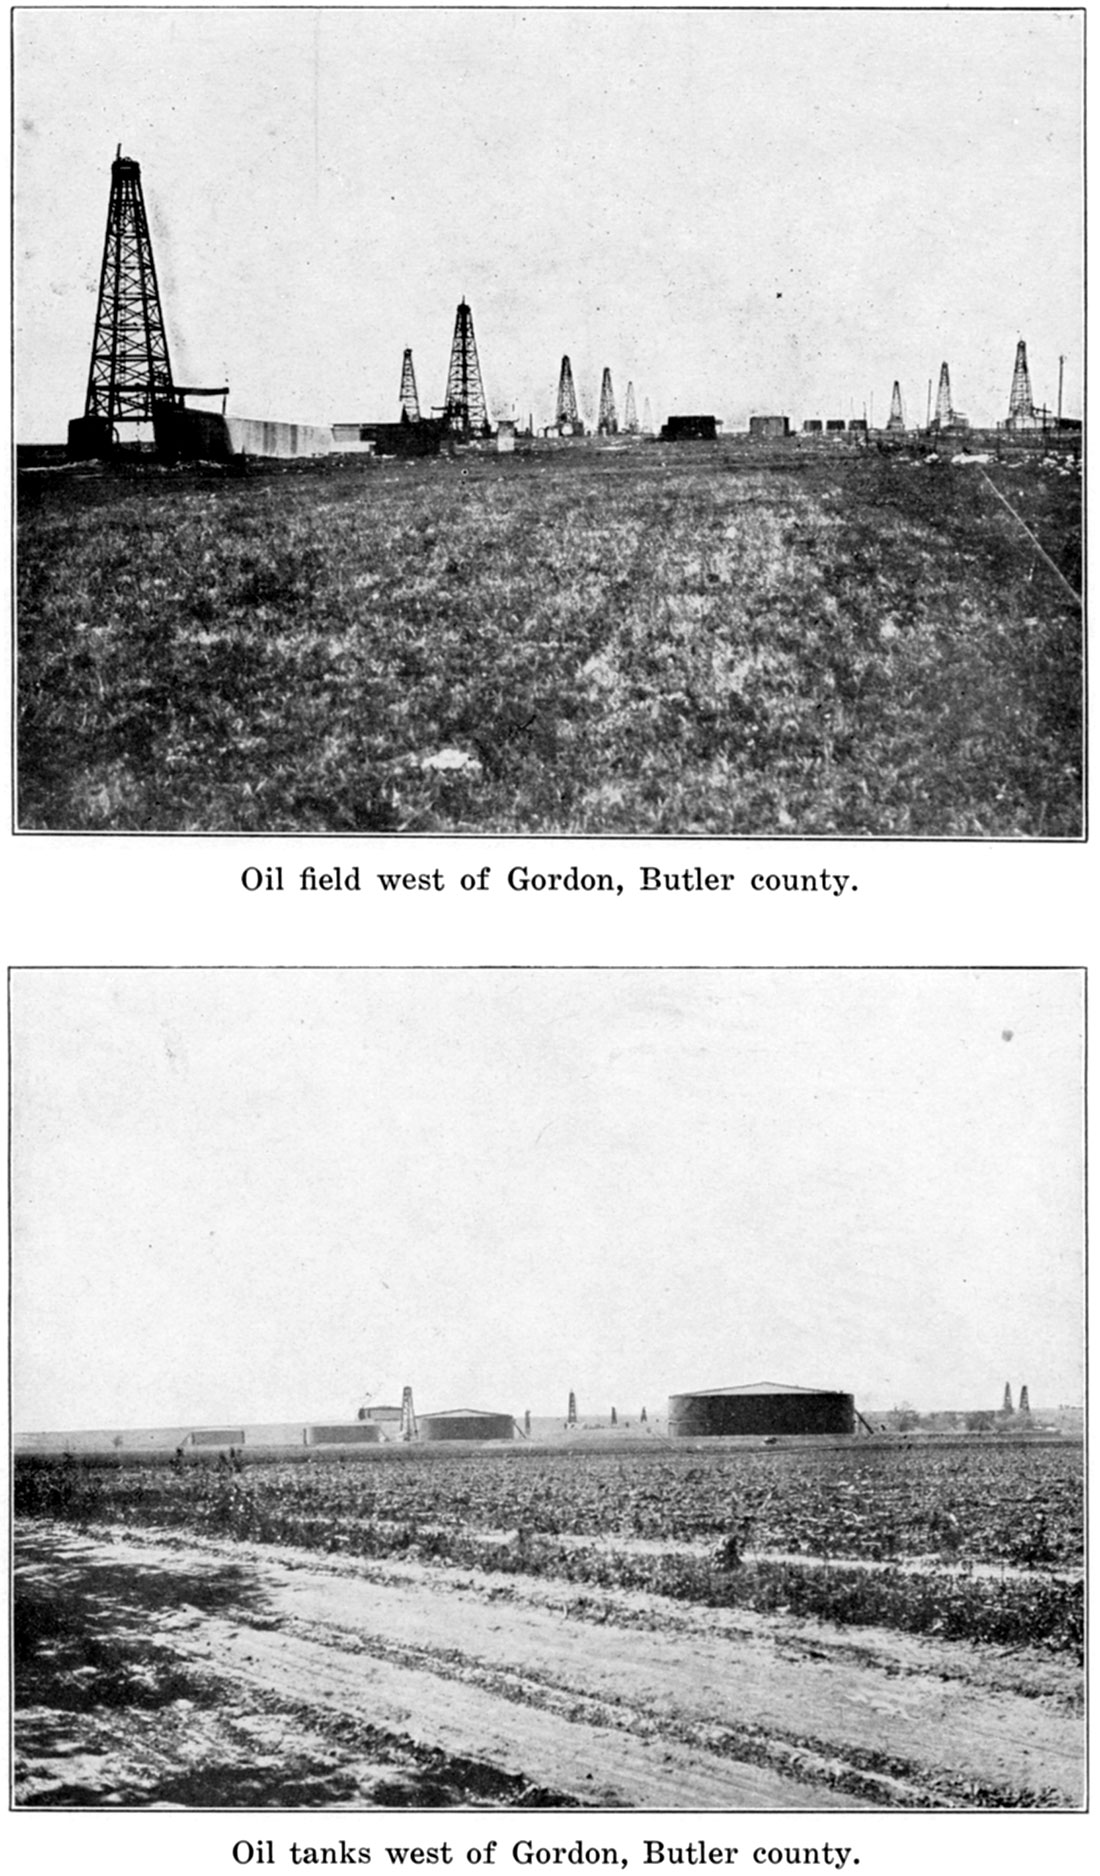 Two black and white photos; Oil field west of Gordon, Butler county; Oil tanks west of Gordon, Butler county.